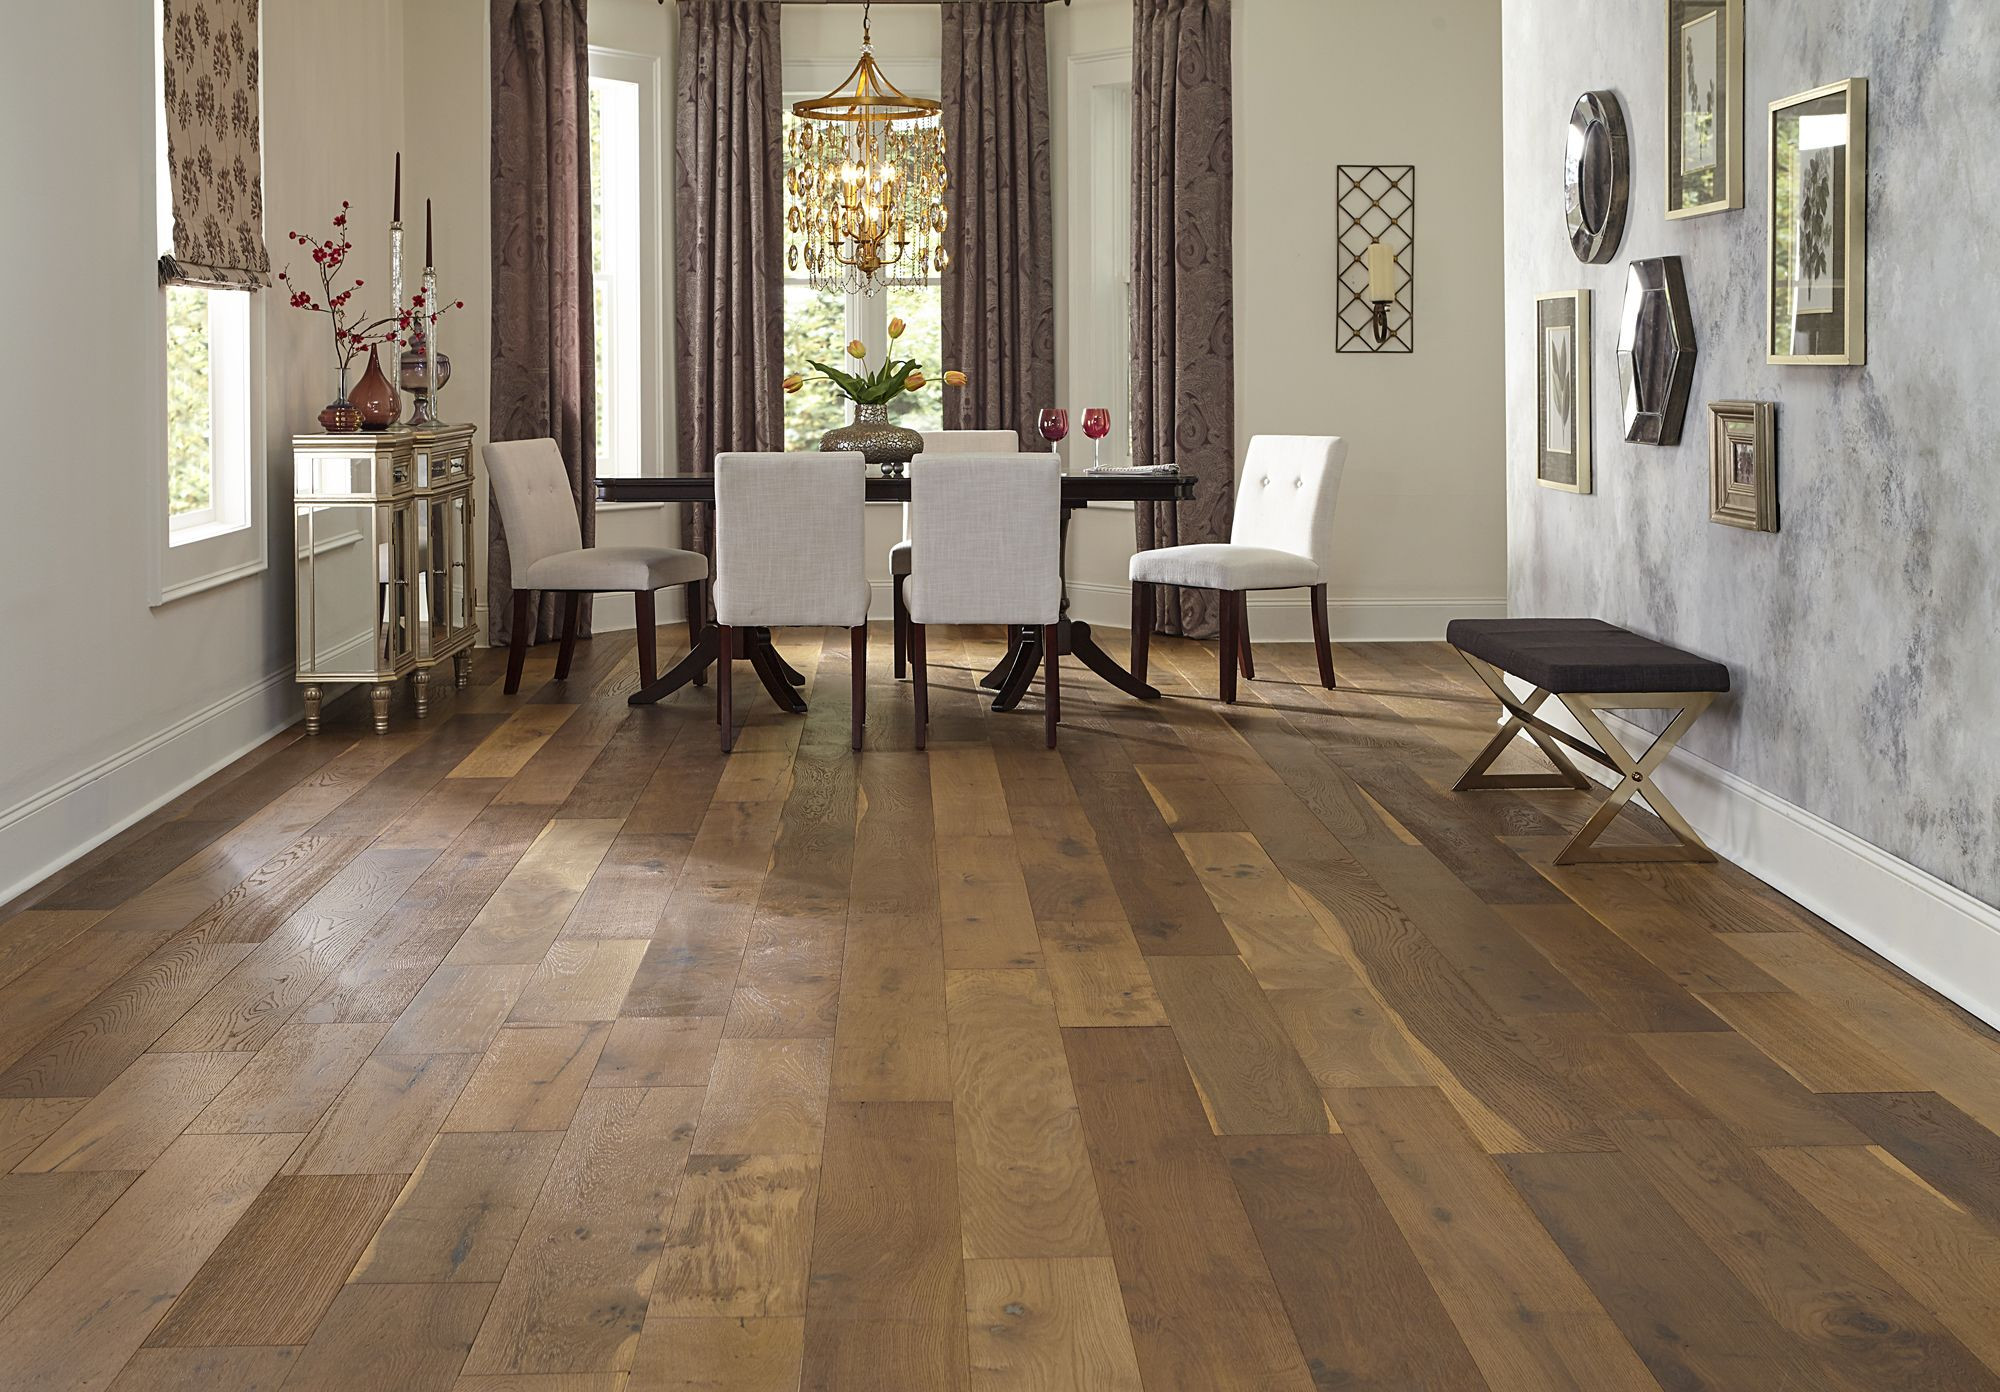 11 Famous Hardwood Flooring Trends for 2017 2022 free download hardwood flooring trends for 2017 of 7 1 2 wide planks and a rustic look bellawood willow manor oak has for 7 1 2 wide planks and a rustic look bellawood willow manor oak has a storied old w